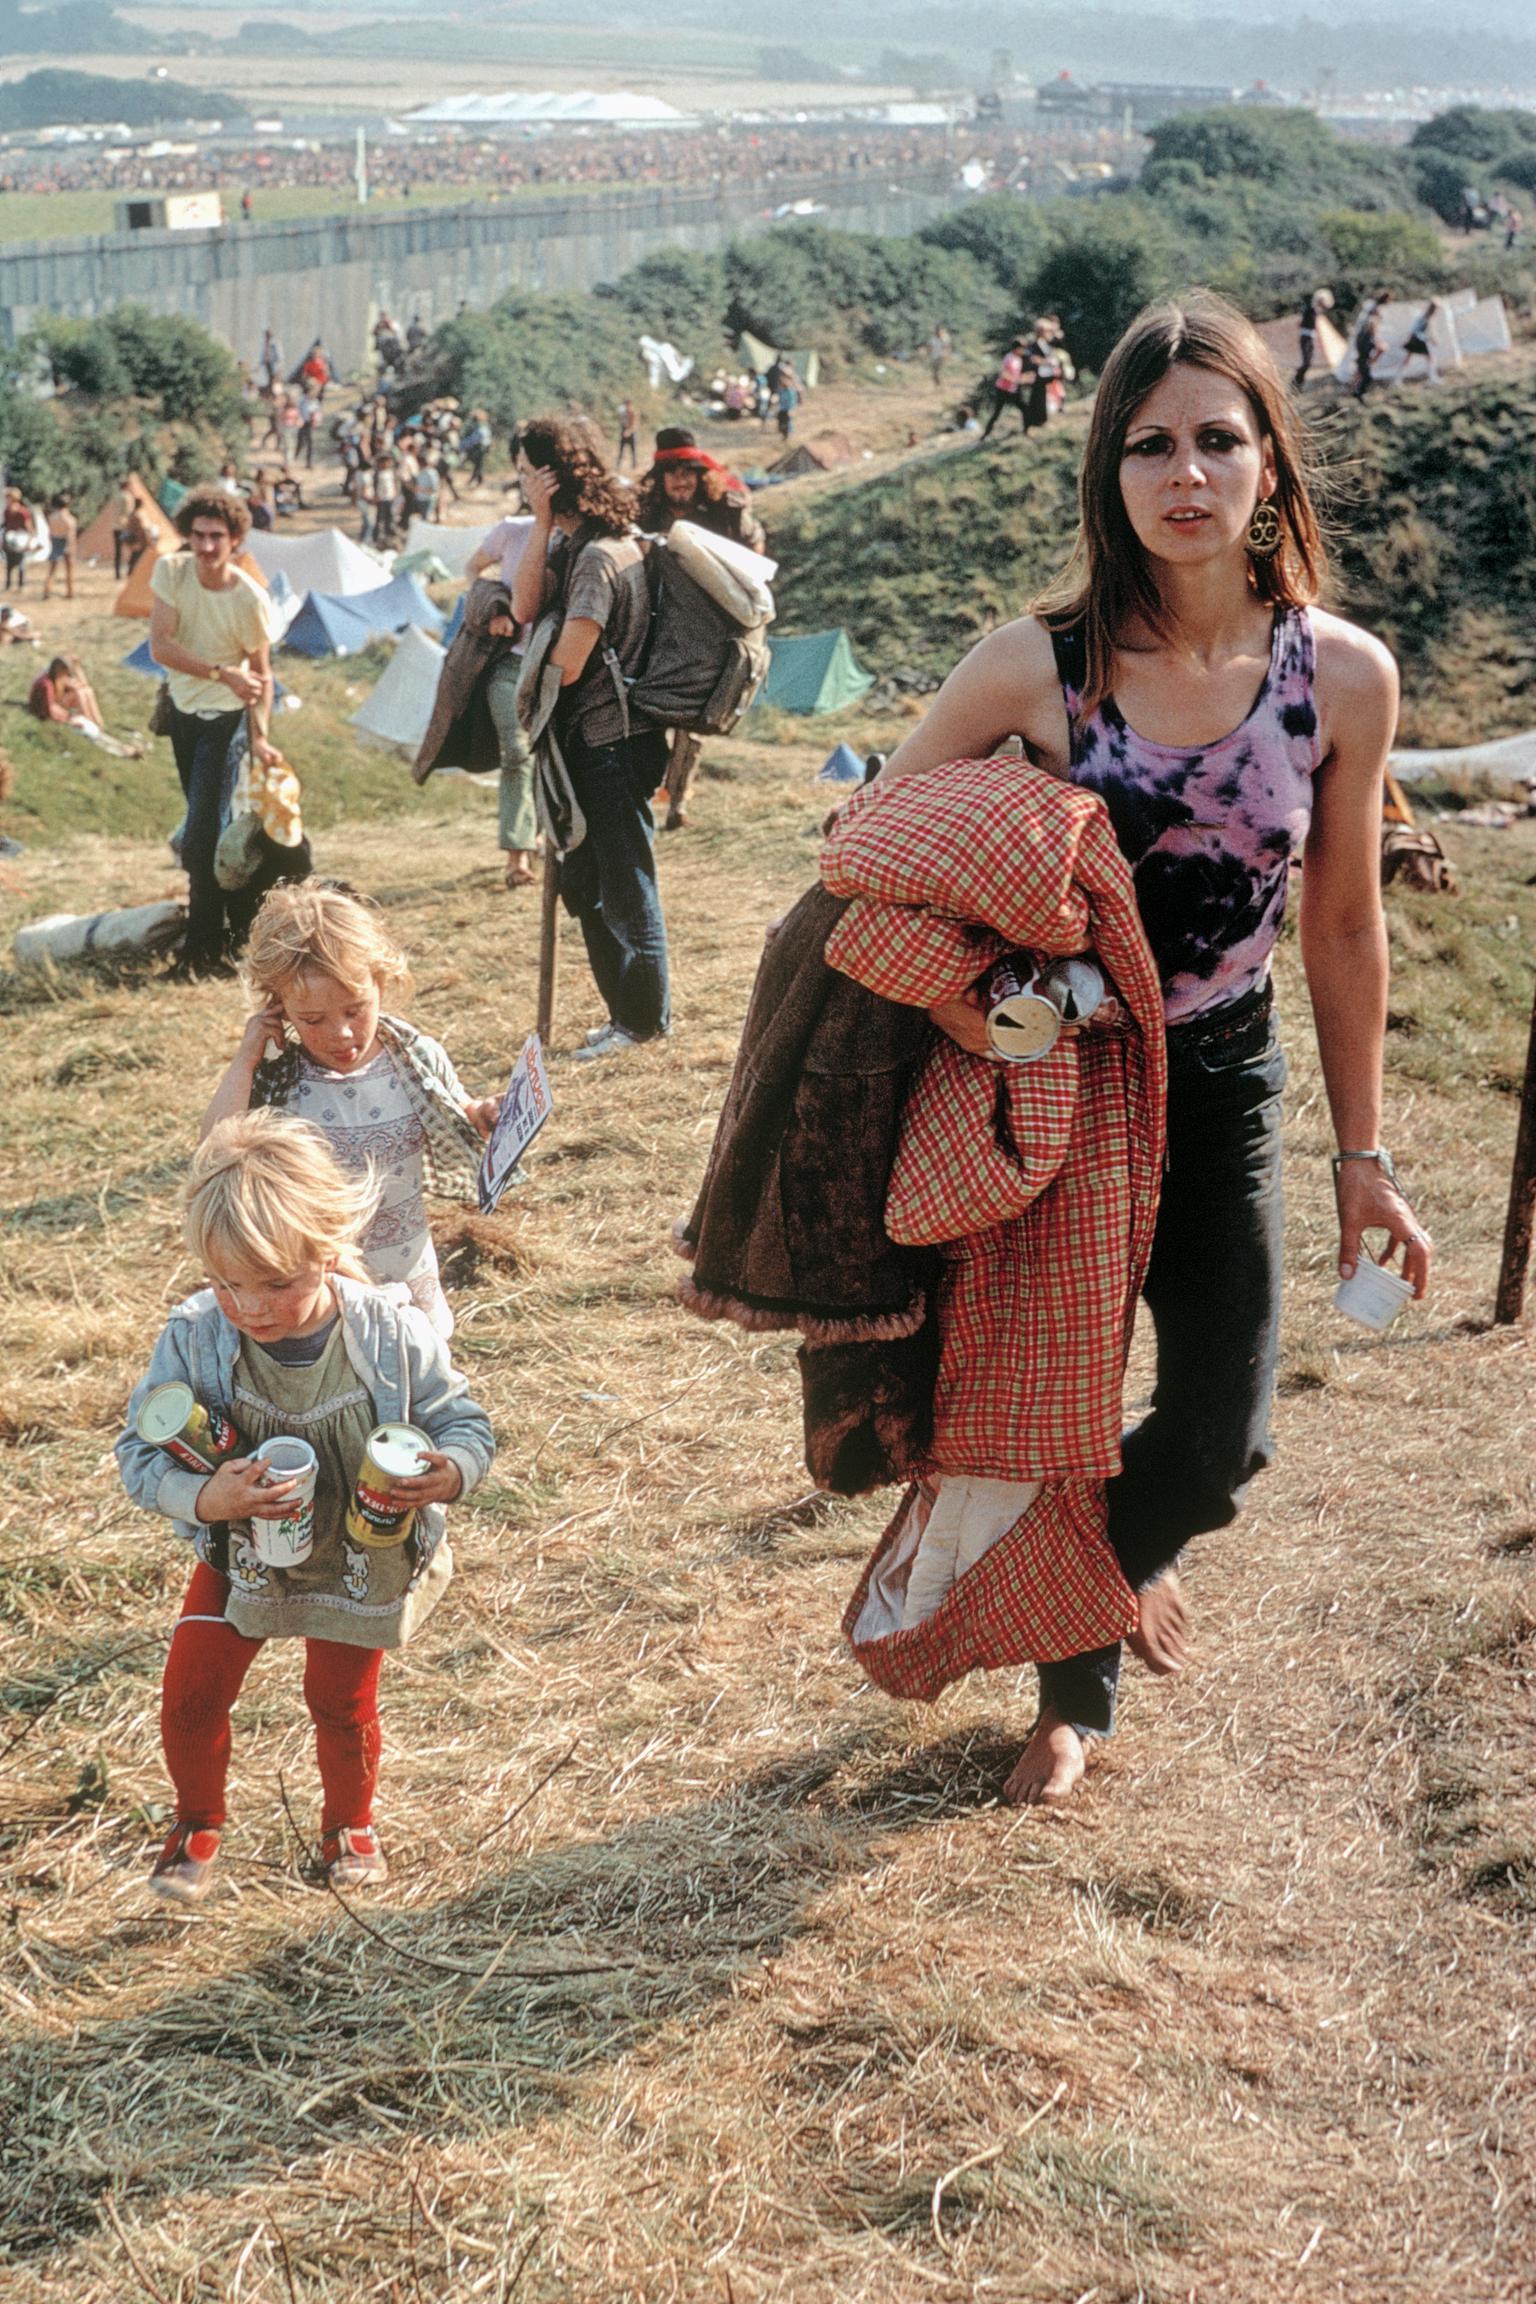 Isle of Wight Festival. Careless Hippy 25 years old mother with 5 years old Joanna and 3 years old Plum